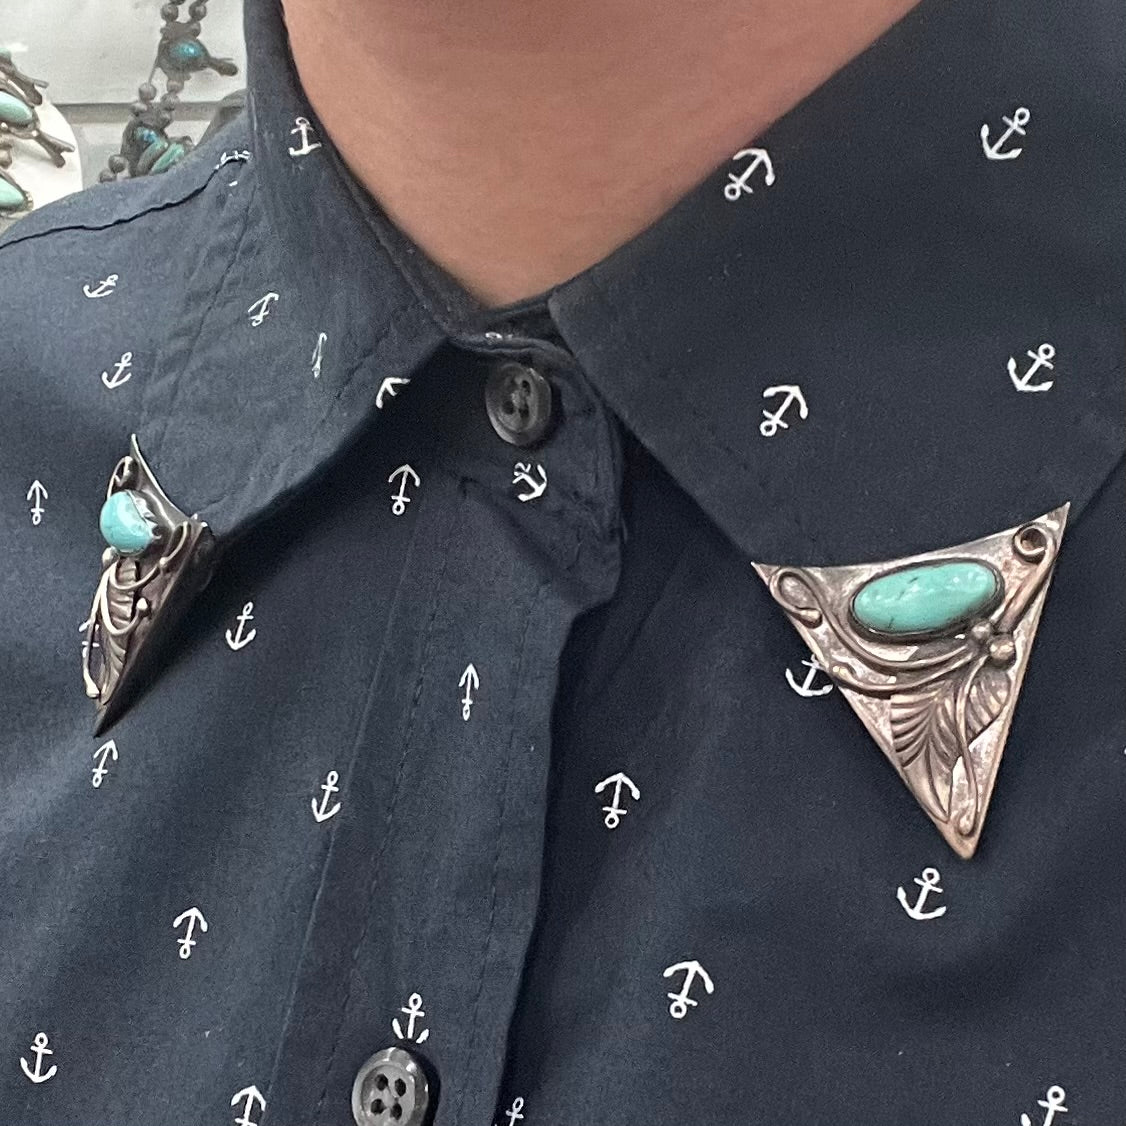 A pair of sterling silver and turquoise shirt collar tips handmade by Navajo artist, Phillip Guerro.